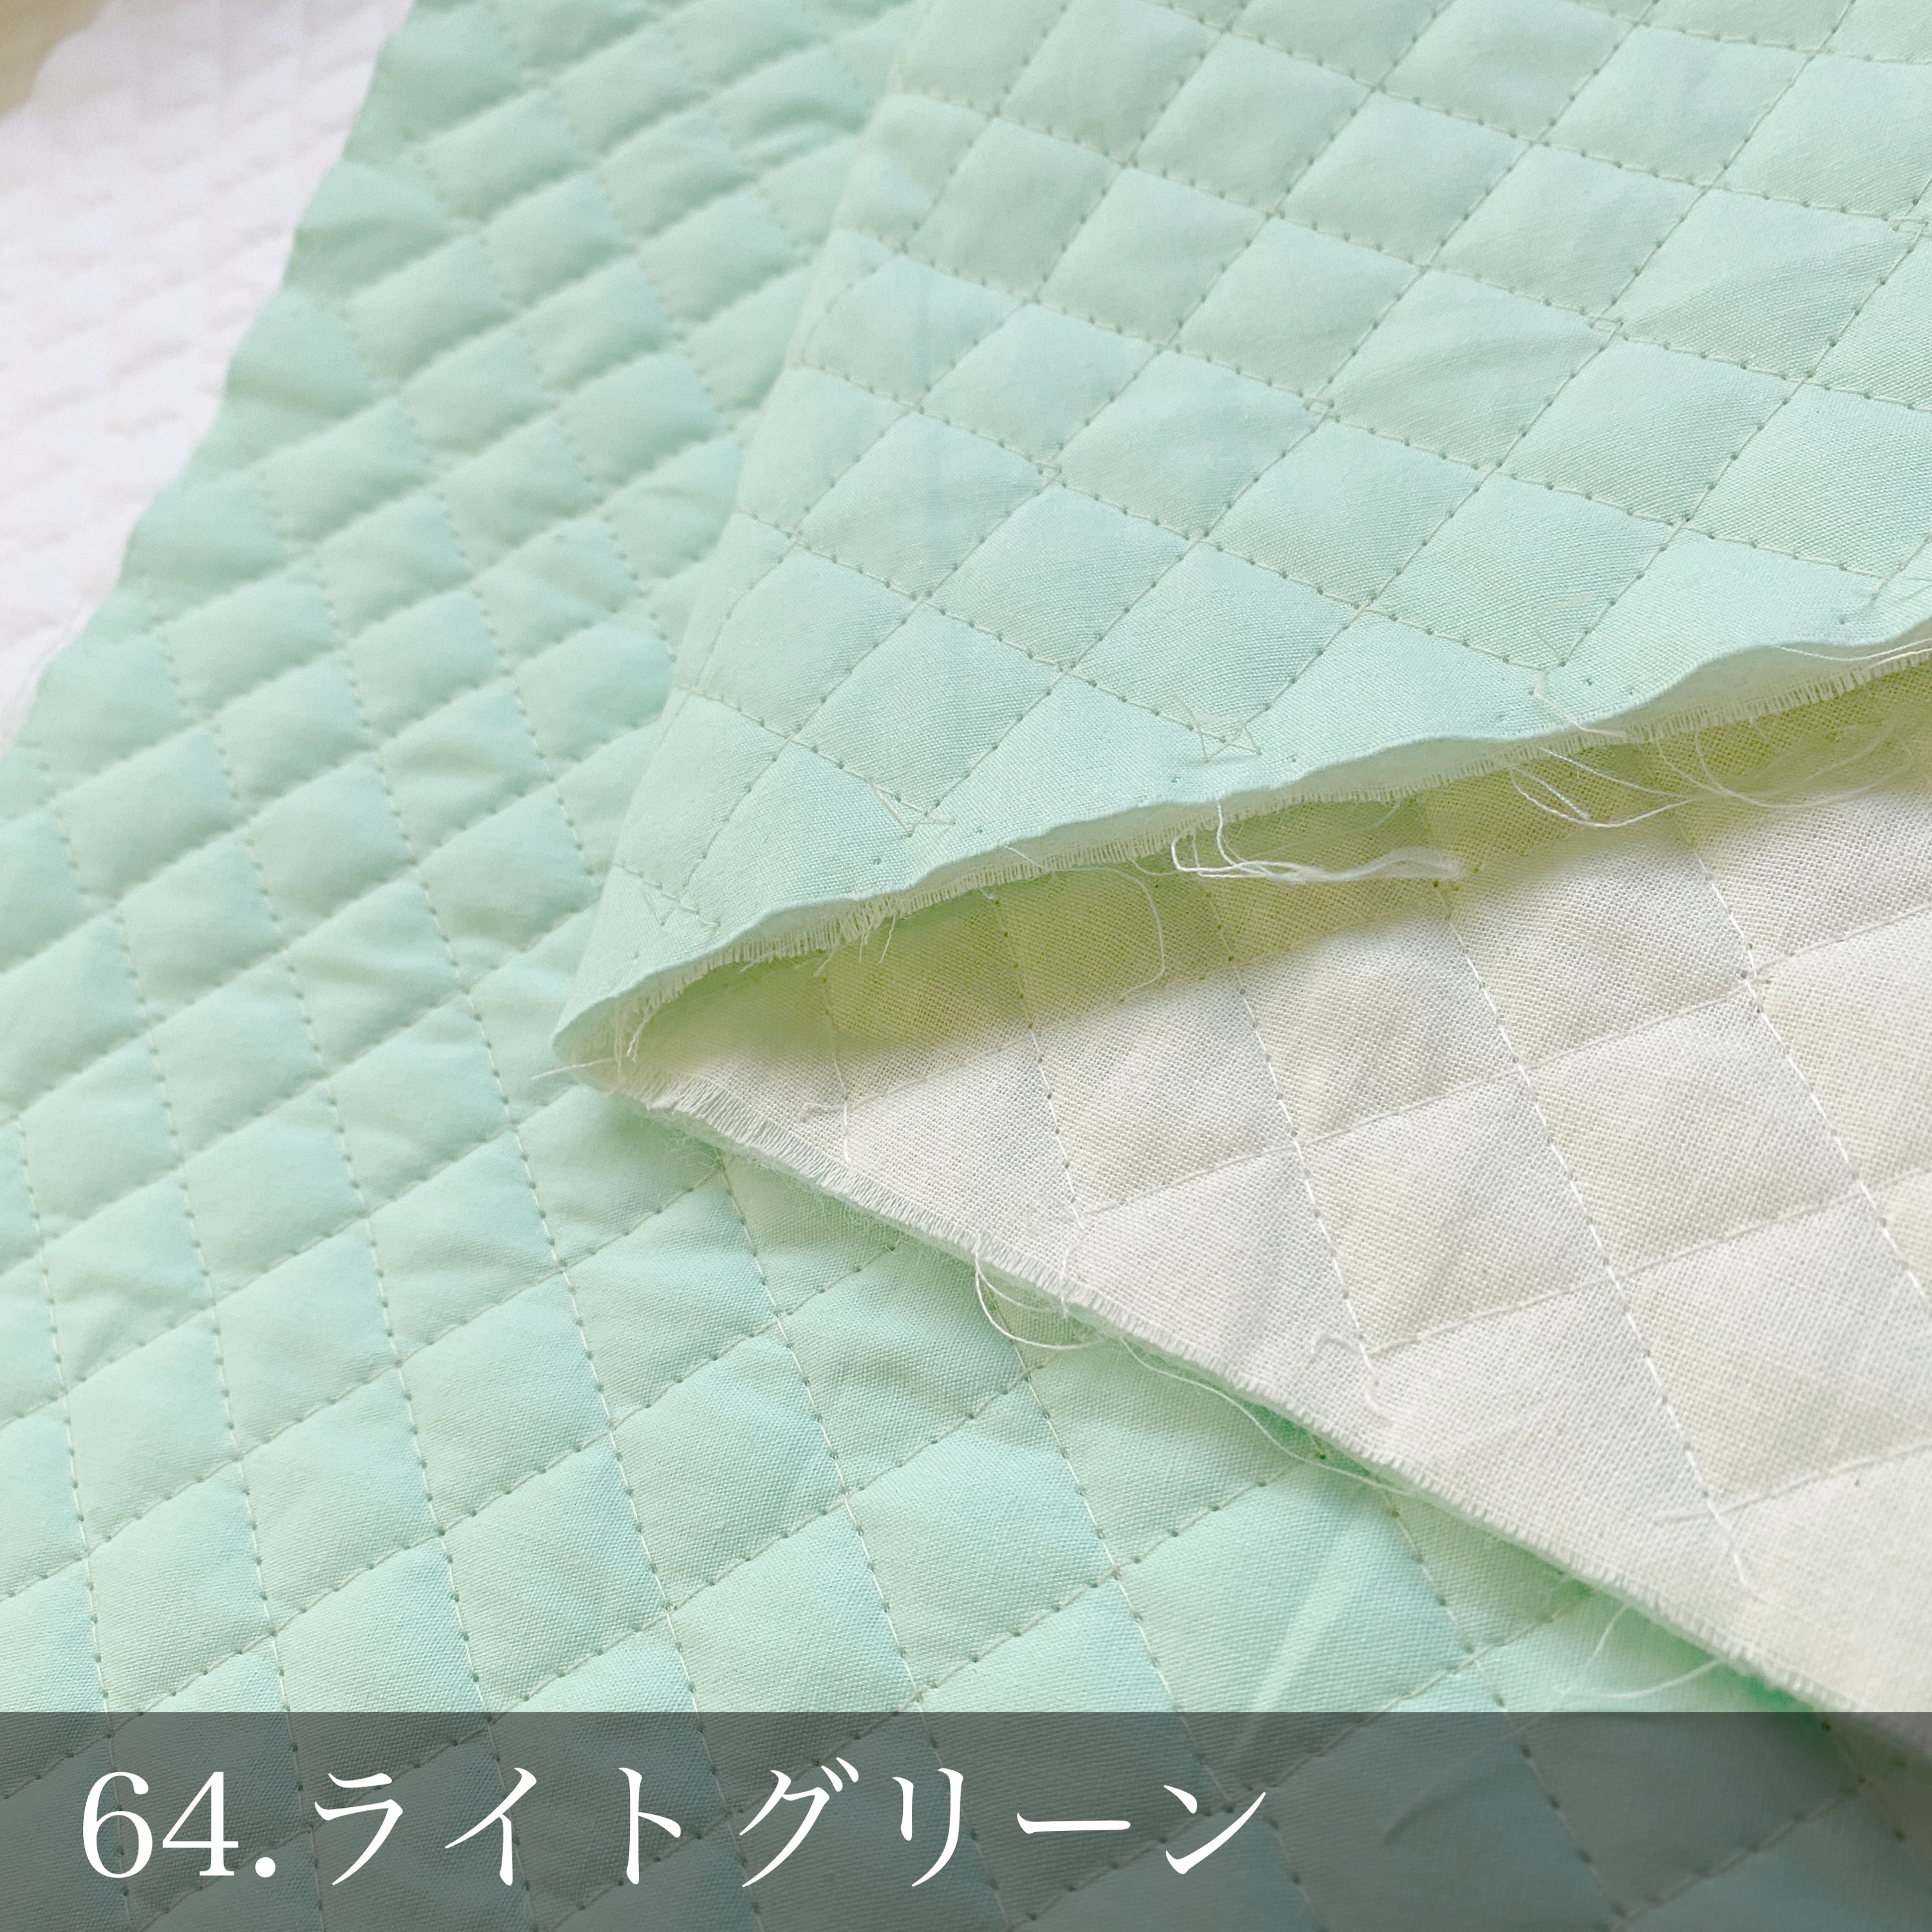  all 28 color colorful . plain. quilting cloth [ green group ]106cm width /10cm unit cloth quilting quilt Broad cotton cotton 100%